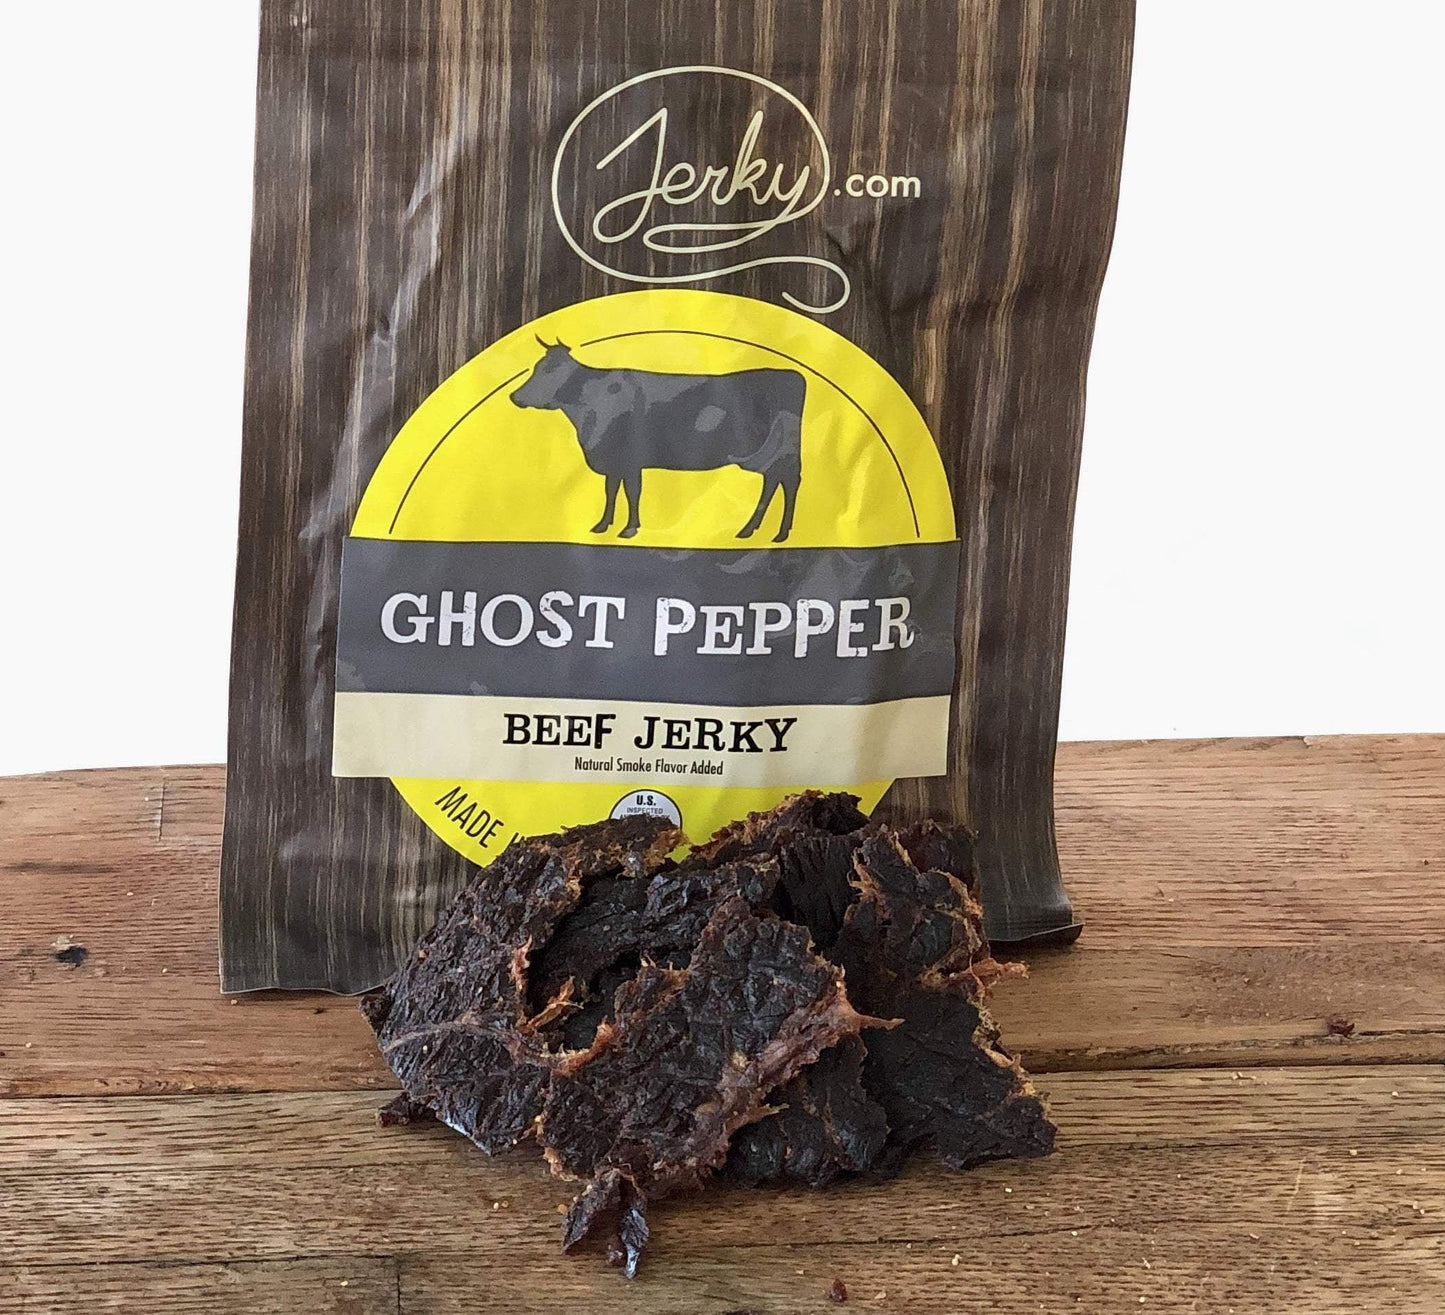 All-Natural Beef Jerky - Ghost Pepper by Jerky.com